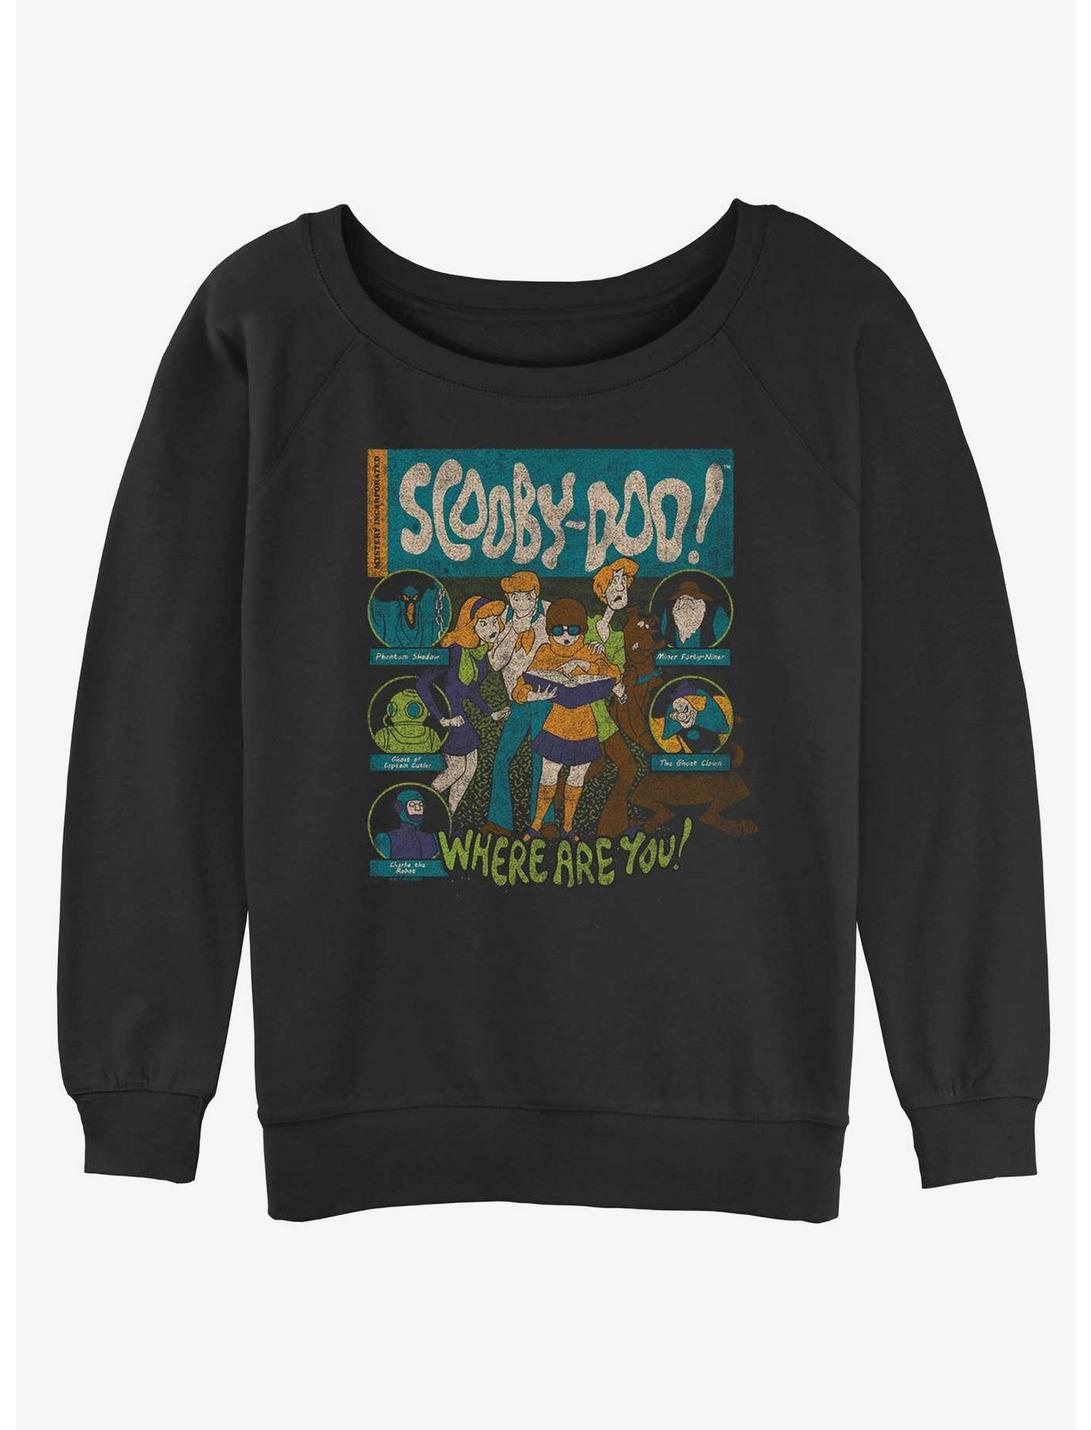 Scooby Doo Mystery Poster Womens Slouchy Sweatshirt, BLACK, hi-res